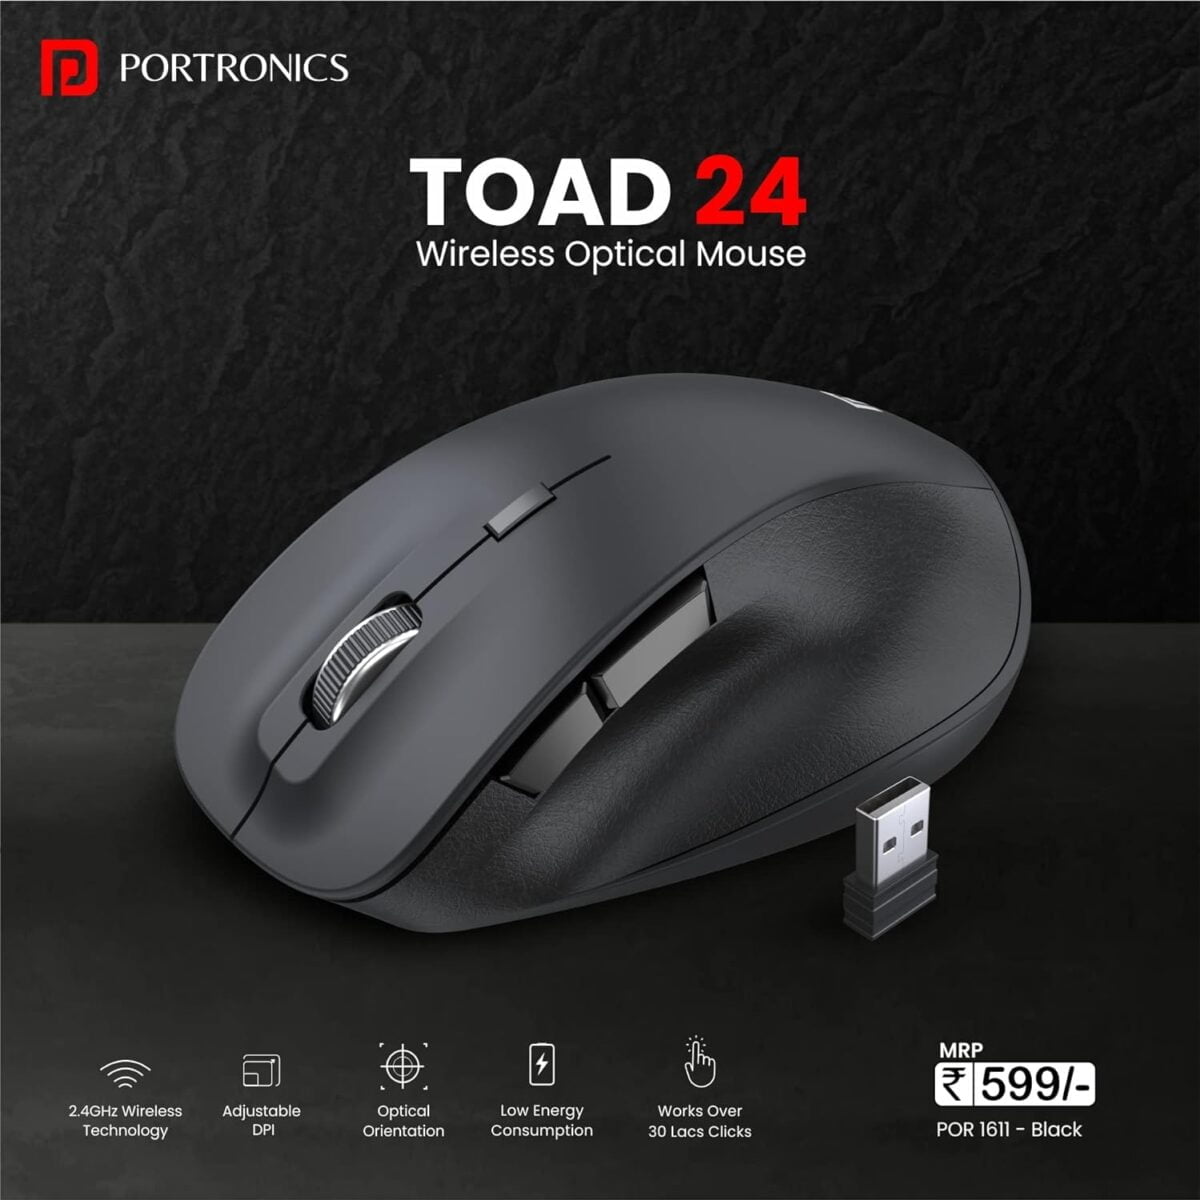 Portronics toad 24 wireless mouse